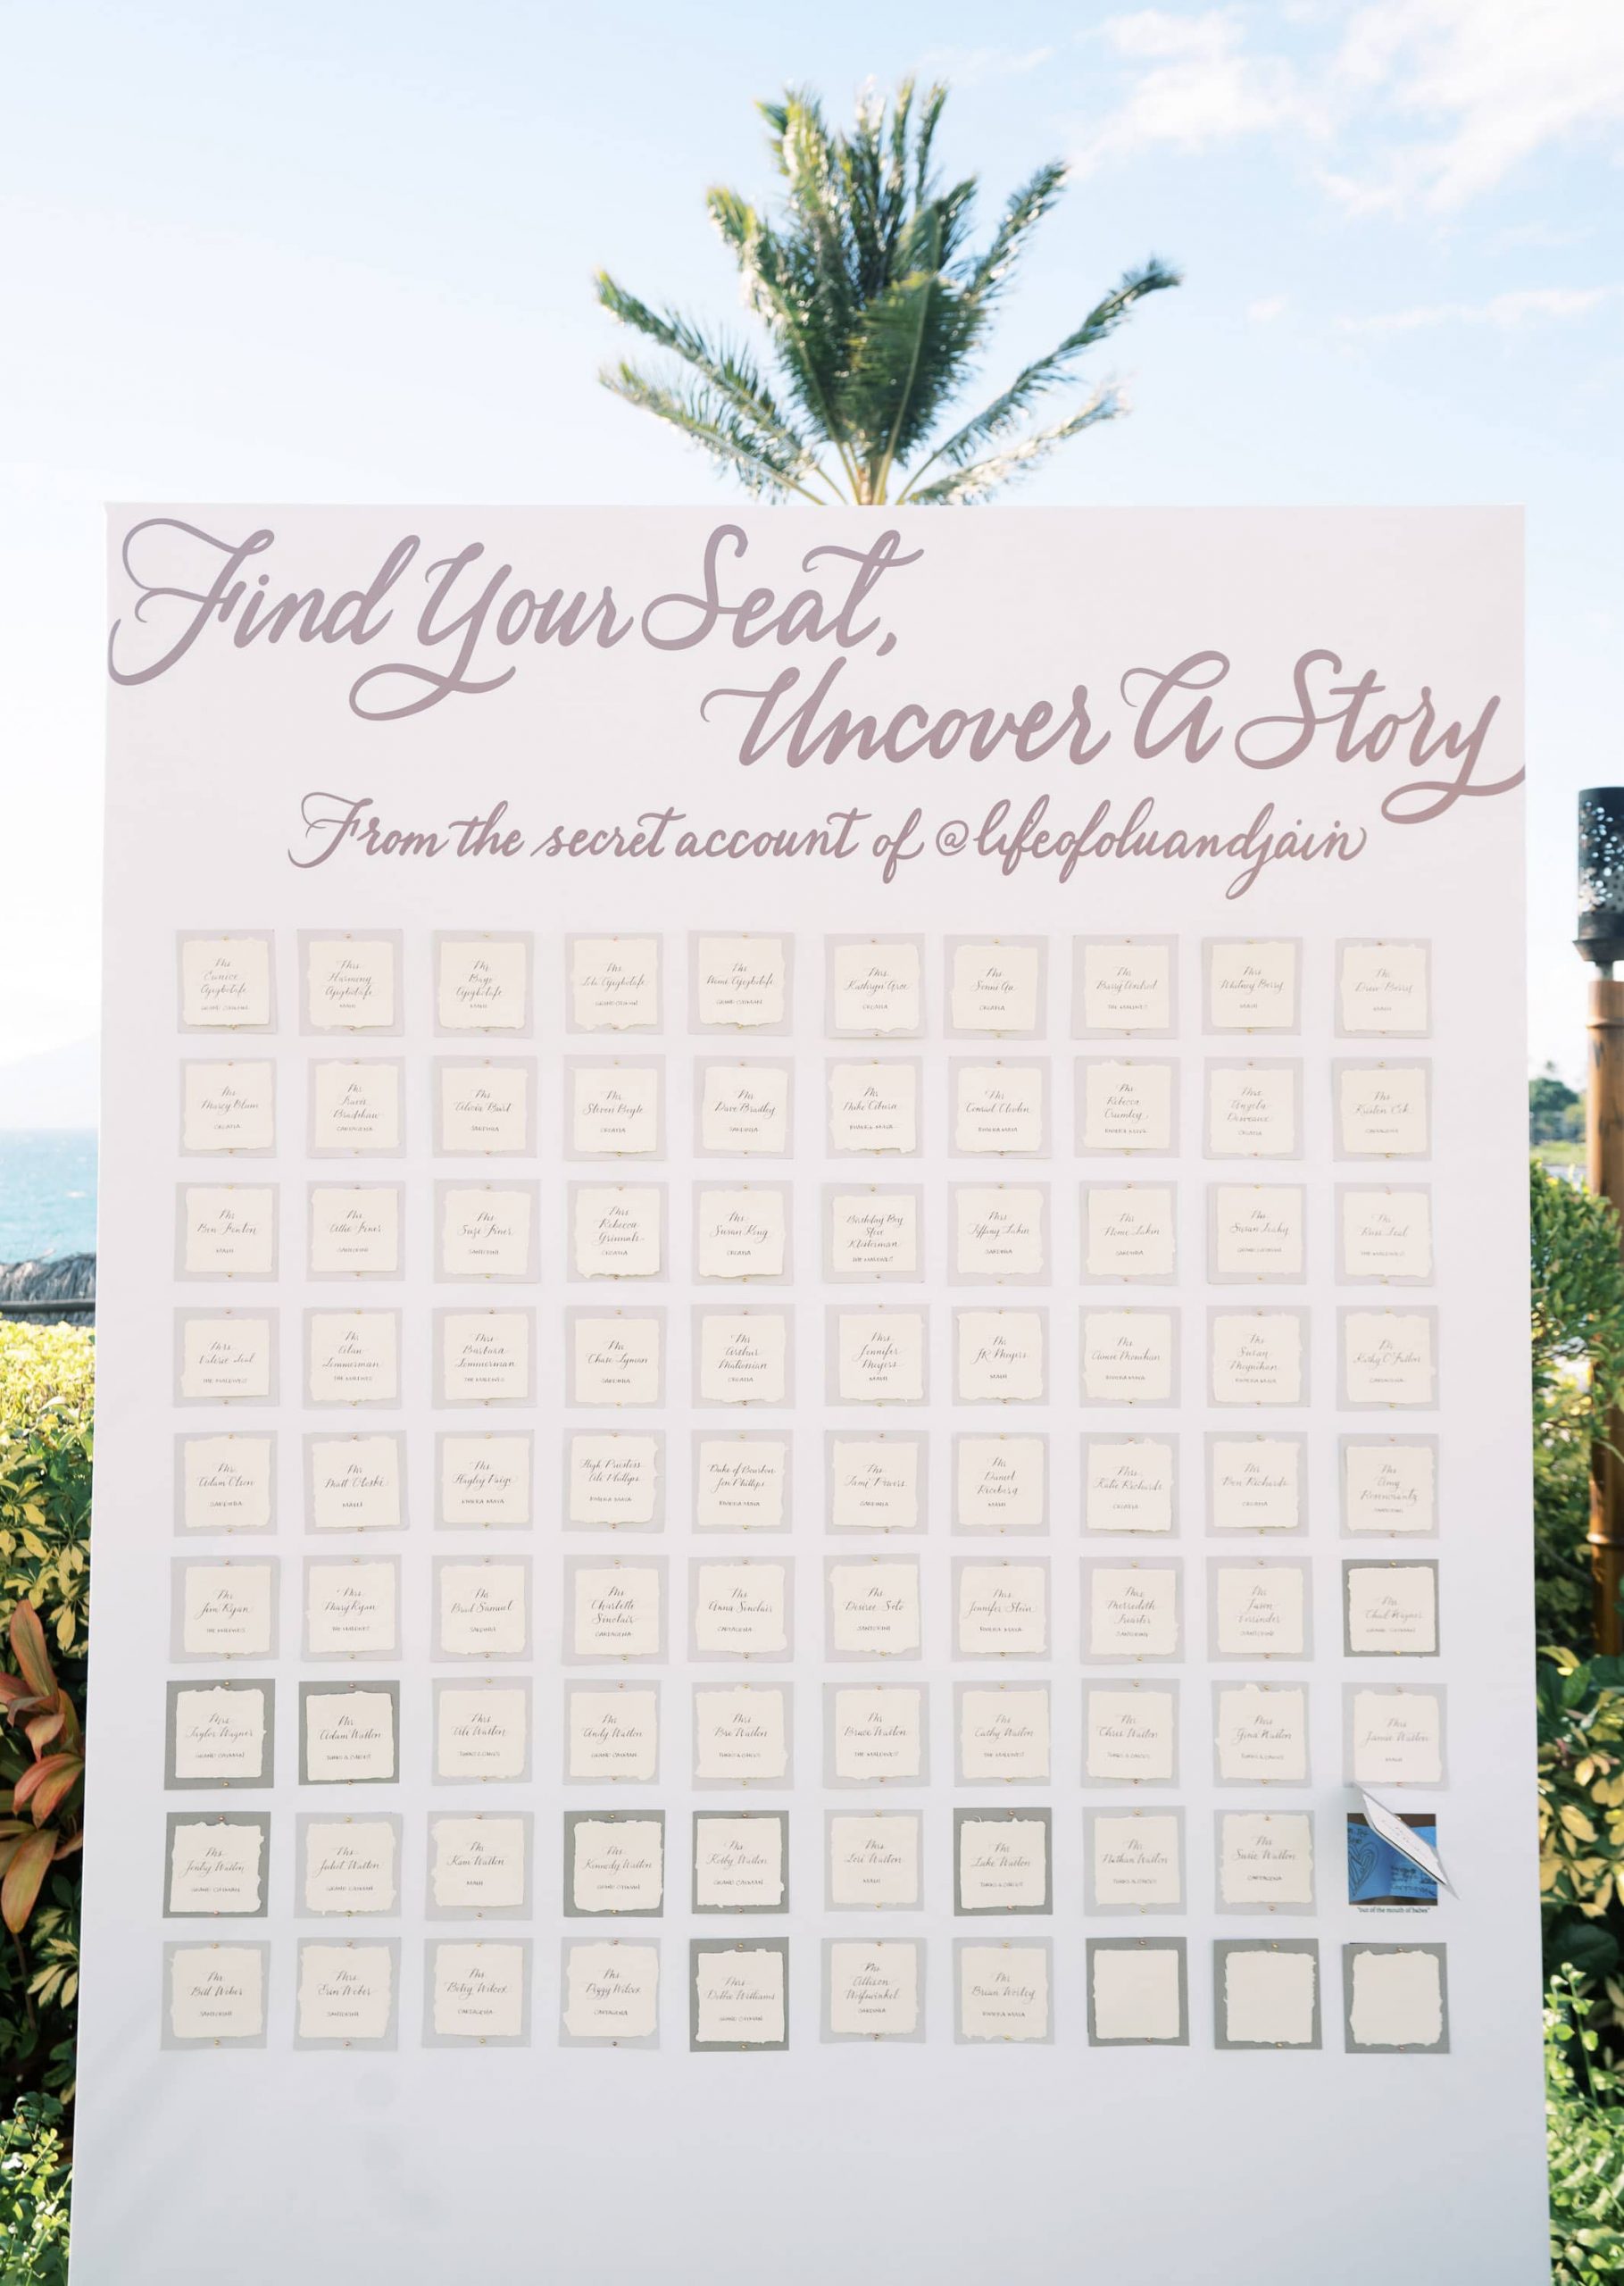 Peel away seating chart at Maui wedding at Four Seasons Resort Maui in Wailea, Hawaii | Photo by James x Schulze, text says "Find your Seat, Uncover a Story from the secret account of @lifeofoluanandjain